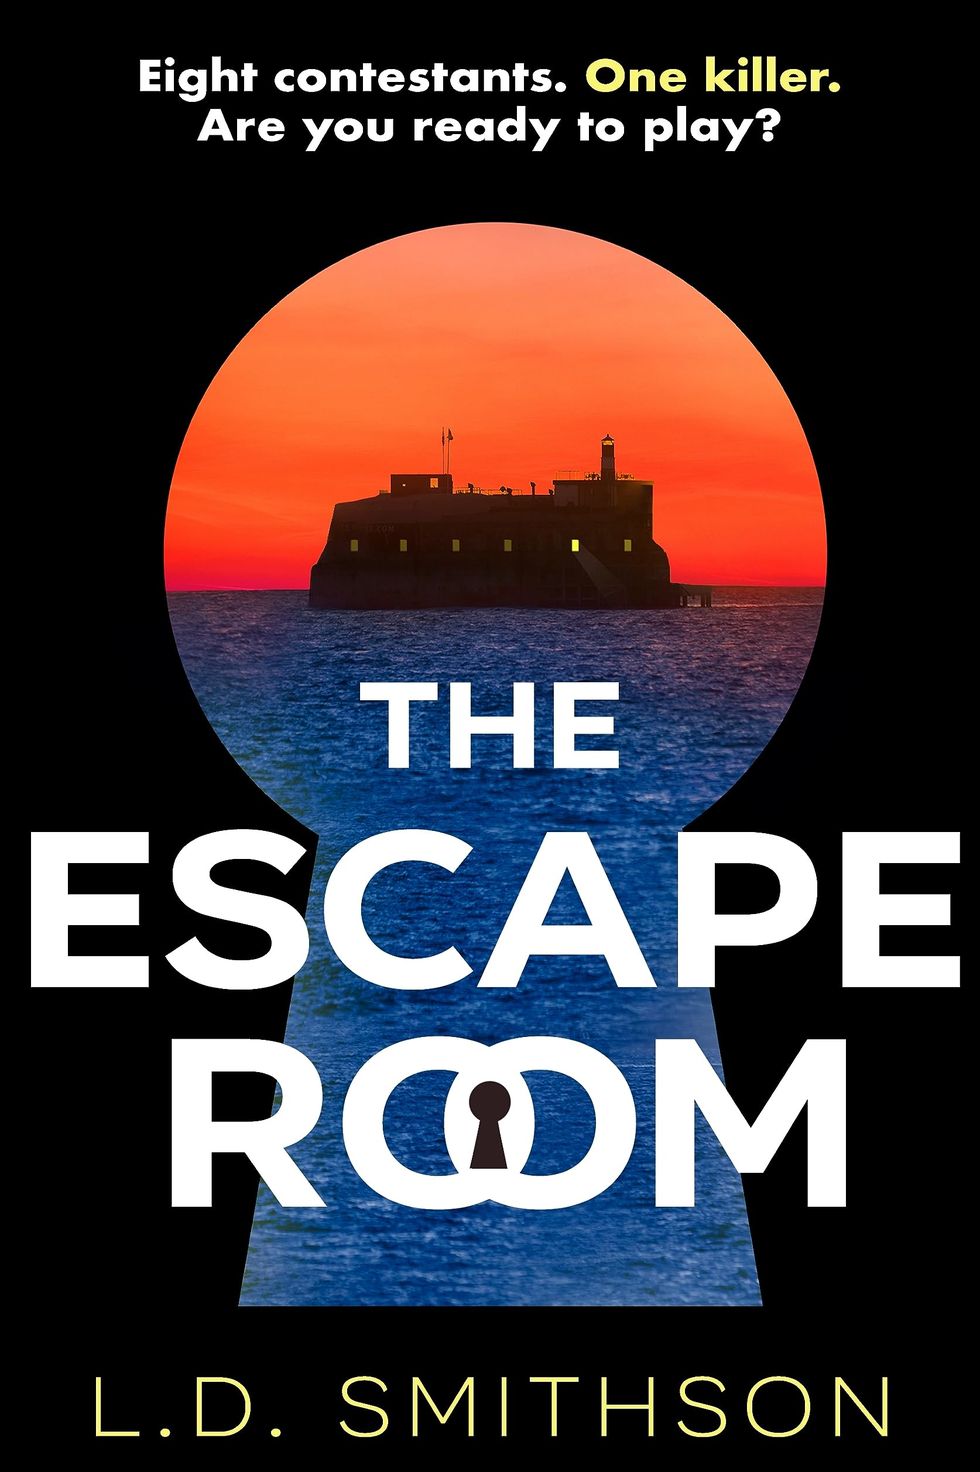 The Escape Room by L. D. Smithson 